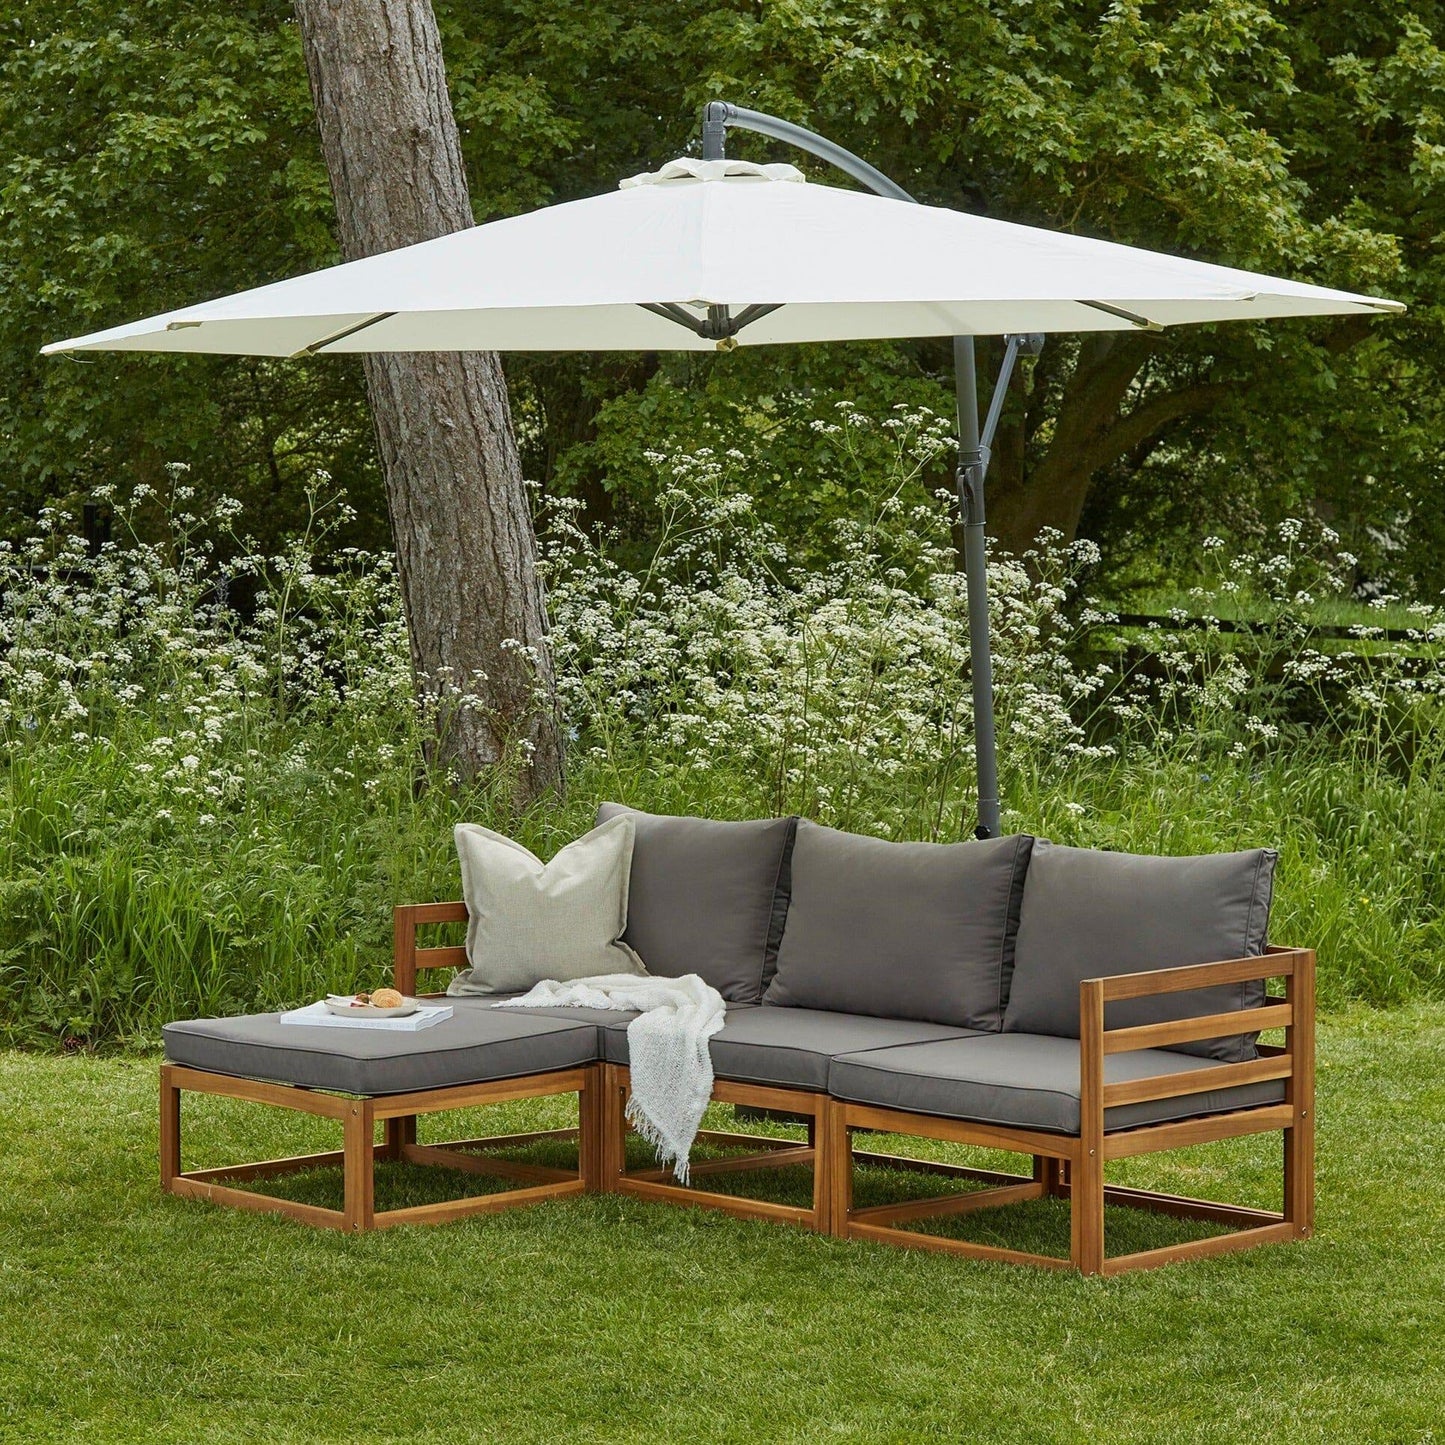 Rowan 3 Seater Wooden Garden Sofa Set With Footstool and Cream Parasol - Laura James